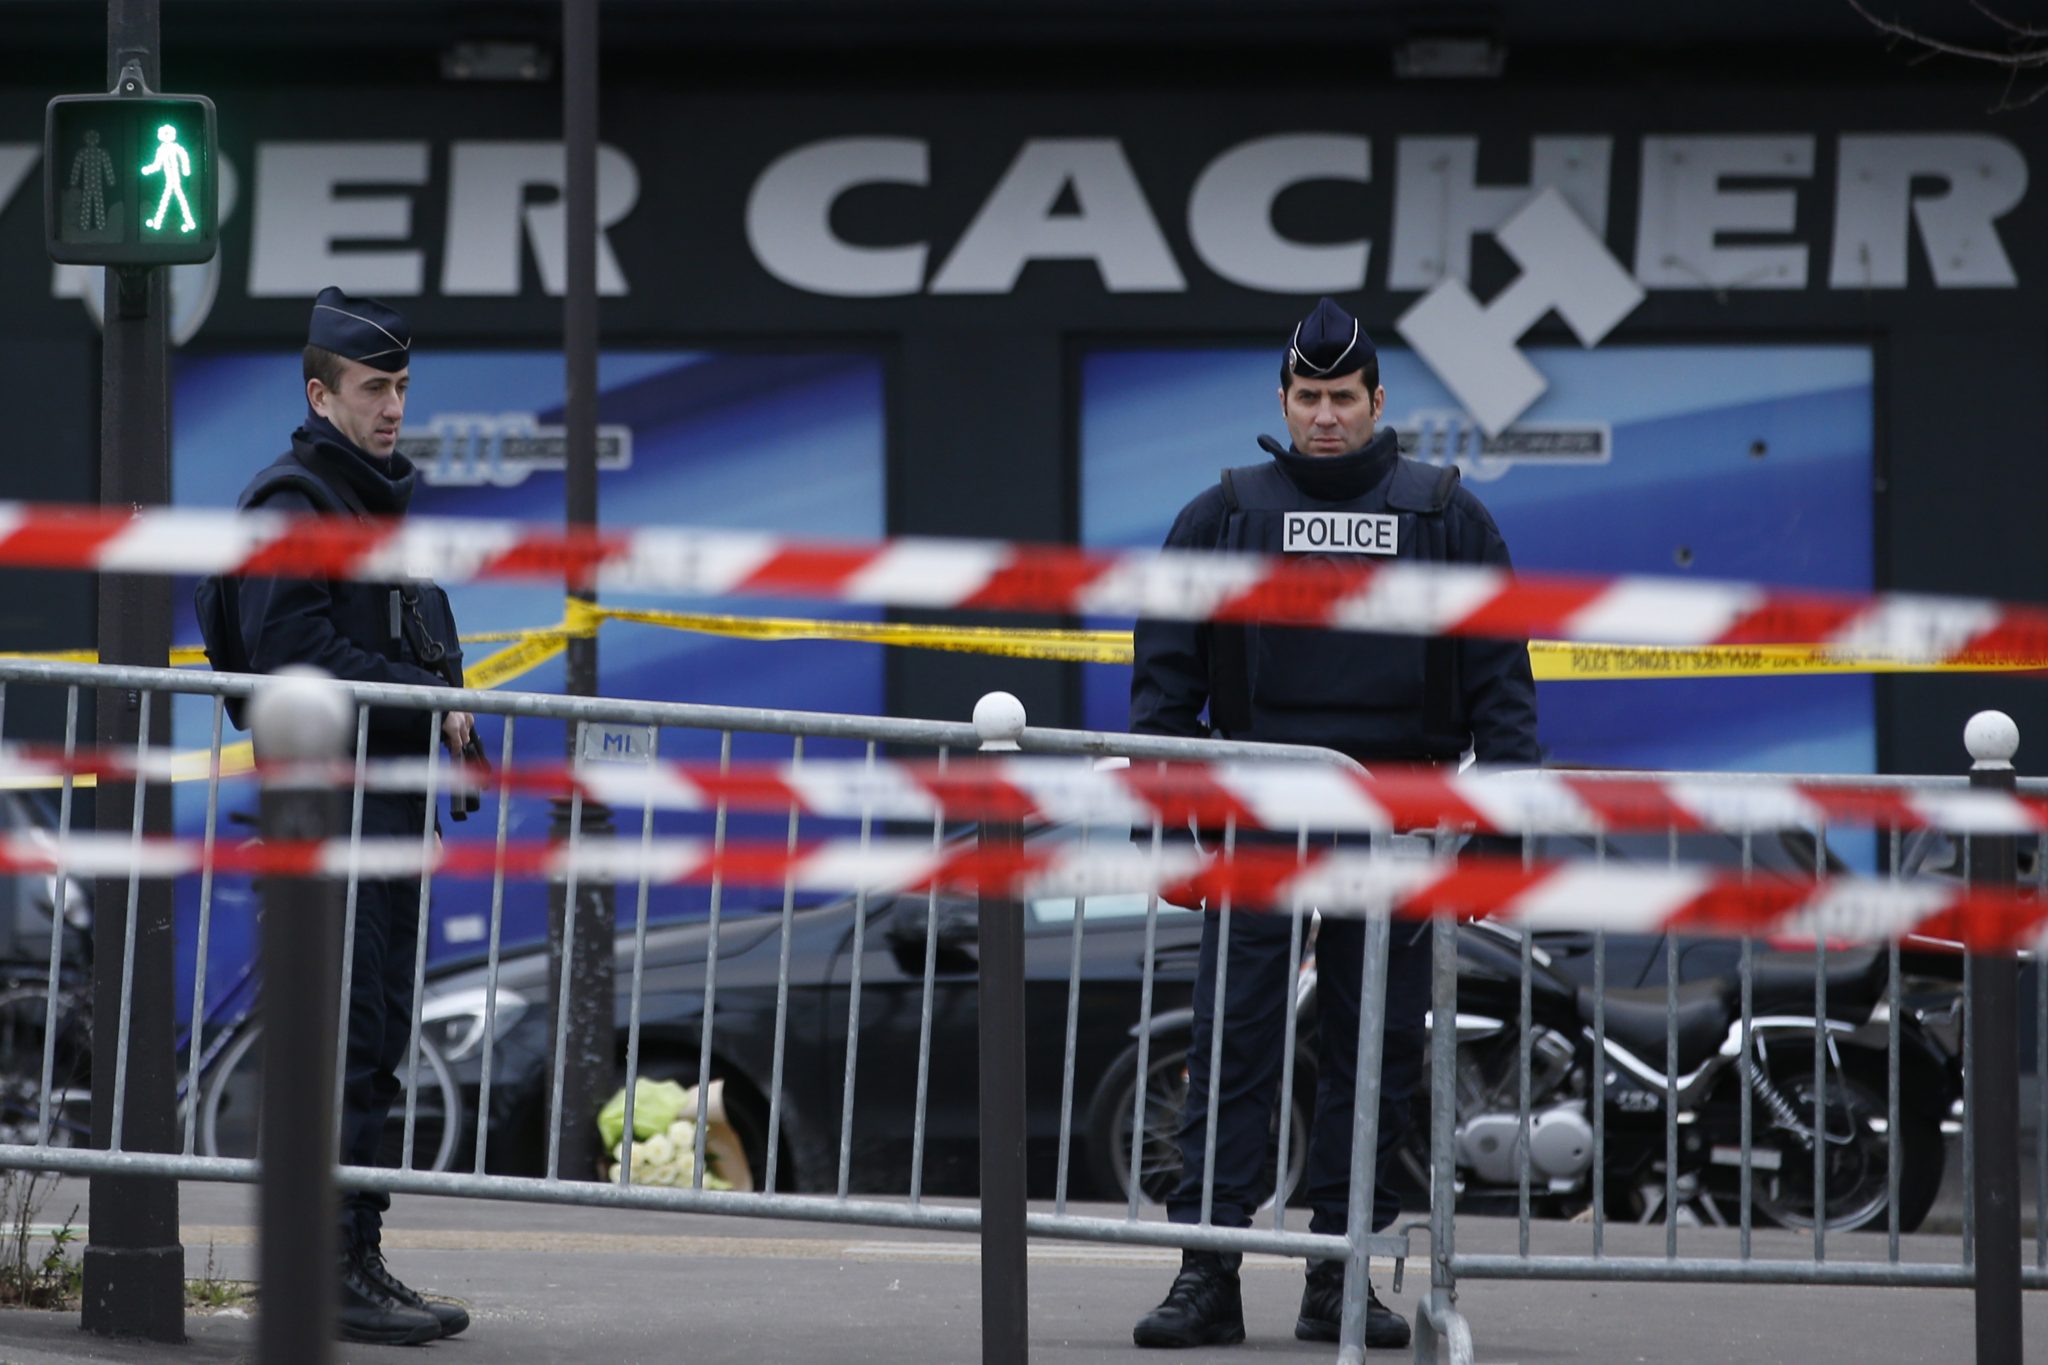 (FILES) This file photo taken on January 10, 2015 shows French police officers standing guard in front of a kosher grocery store in Porte de Vincennes, eastern Paris, a day after four people were killed at the Jewish supermarket by jihadist gunman Amedy Coulibaly during a hostage-taking.  Ten people have been held in custody since April 24, 2017 in connection with the investigation into the attacks in France on Charlie hebdo and Hyper Cacher in January 2015, suspected of involvement in the supply of weapons to Amedy Coulibaly, sources close to the investigation said on April 26, 2017.  / AFP PHOTO / KENZO TRIBOUILLARD